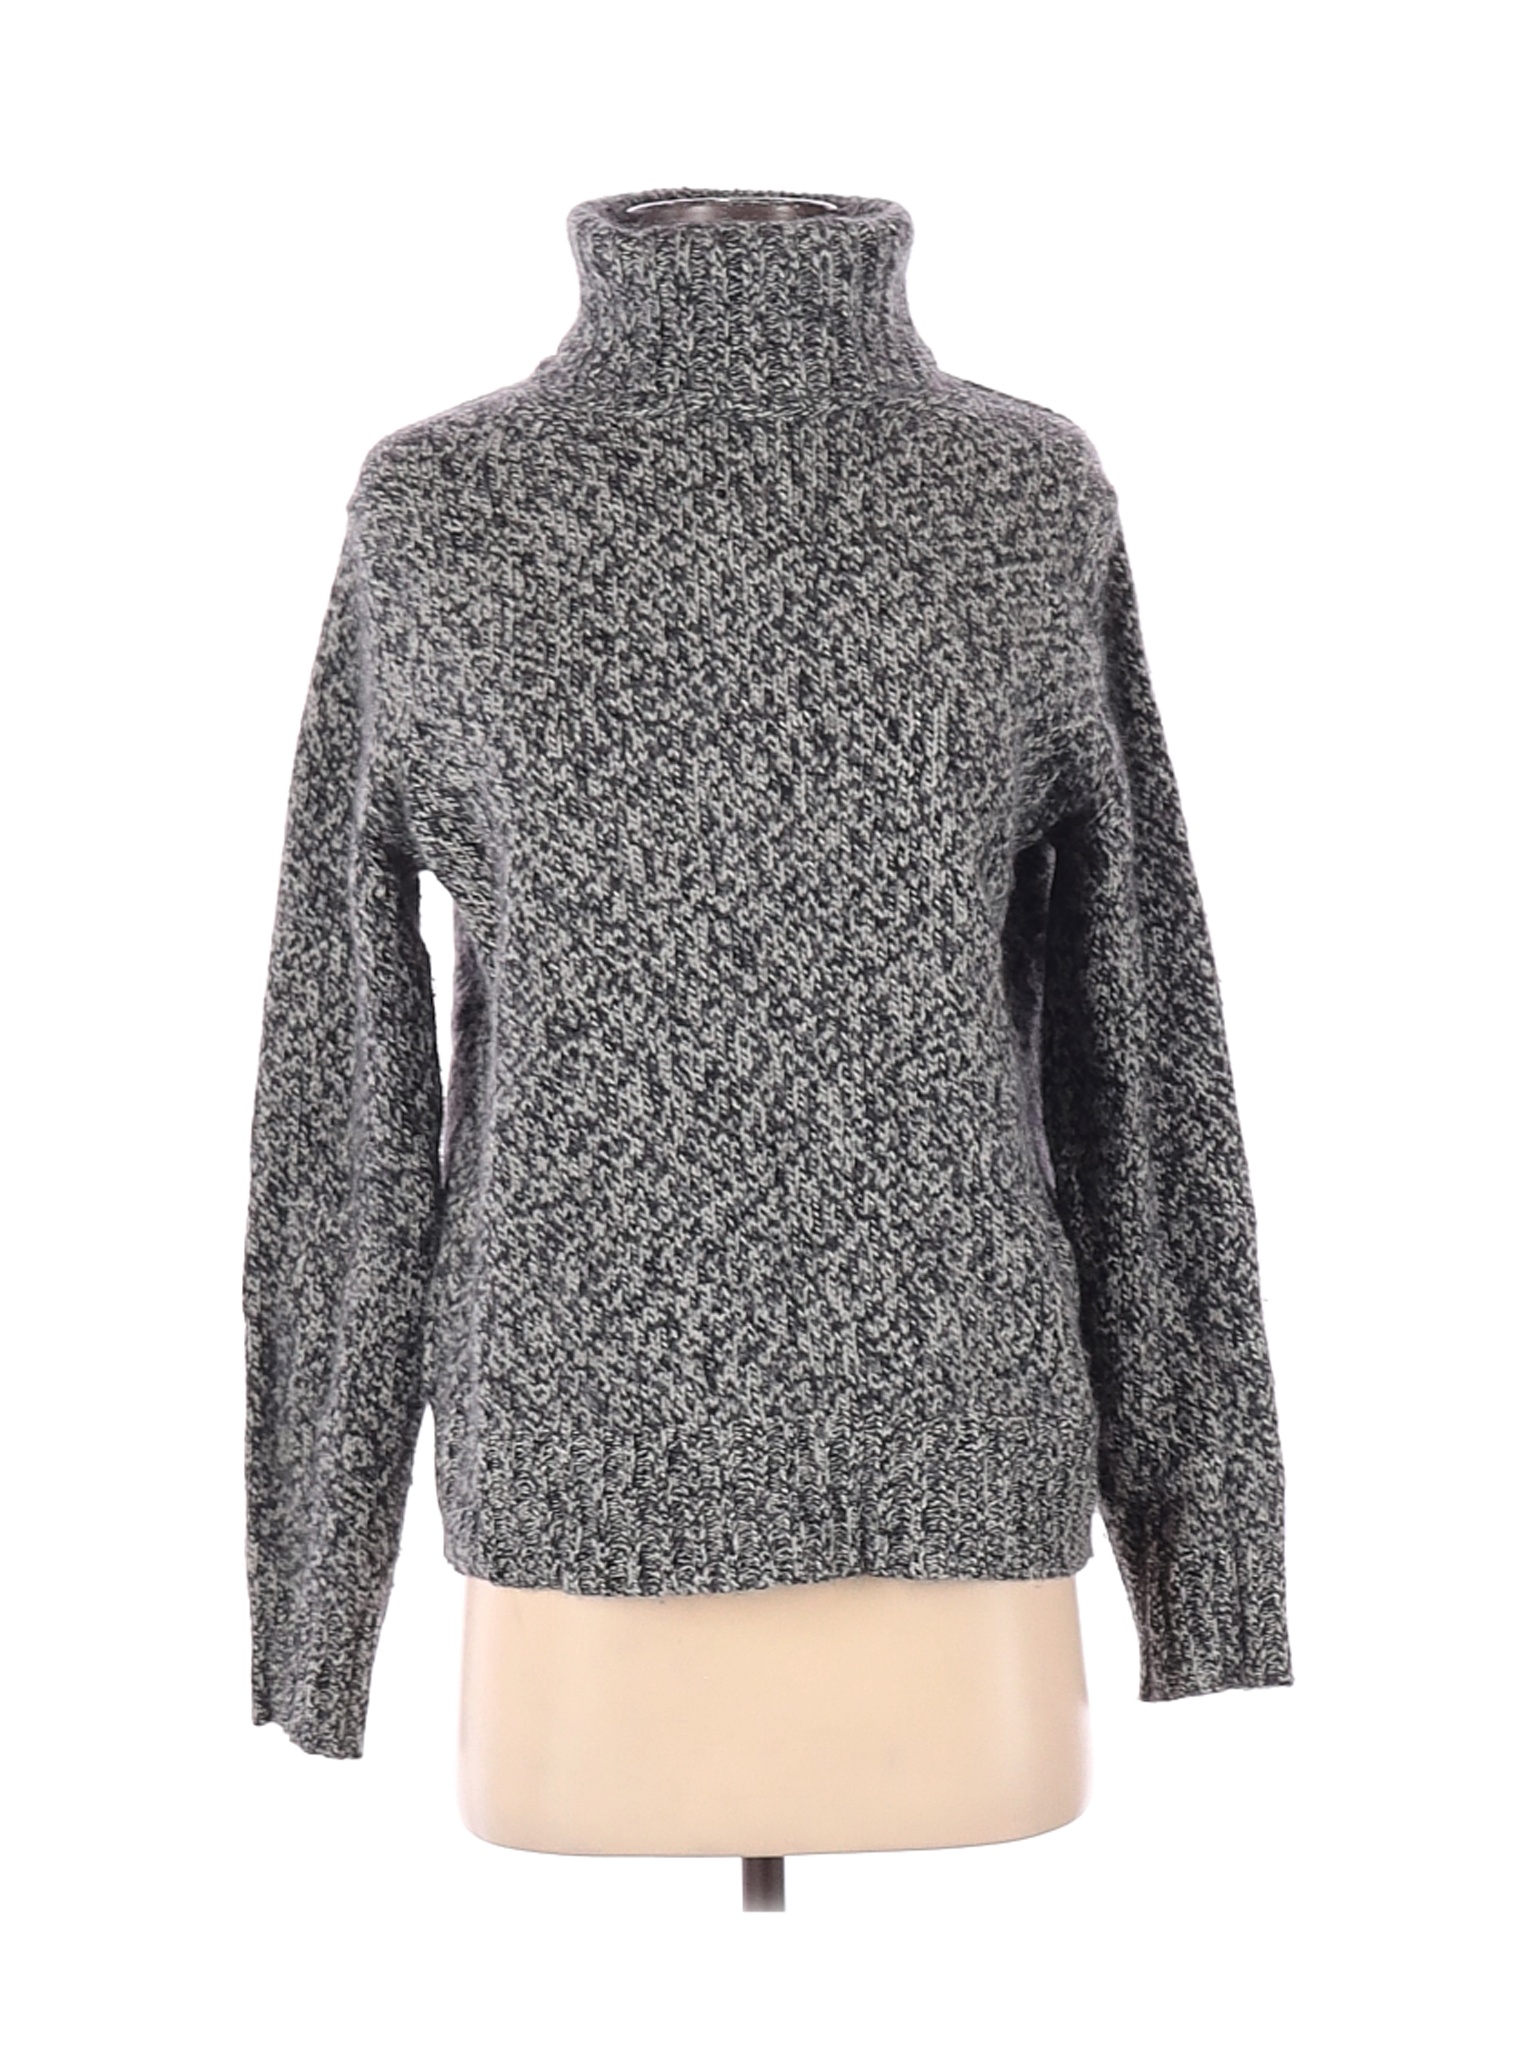 The Limited Women Gray Wool Pullover Sweater S | eBay